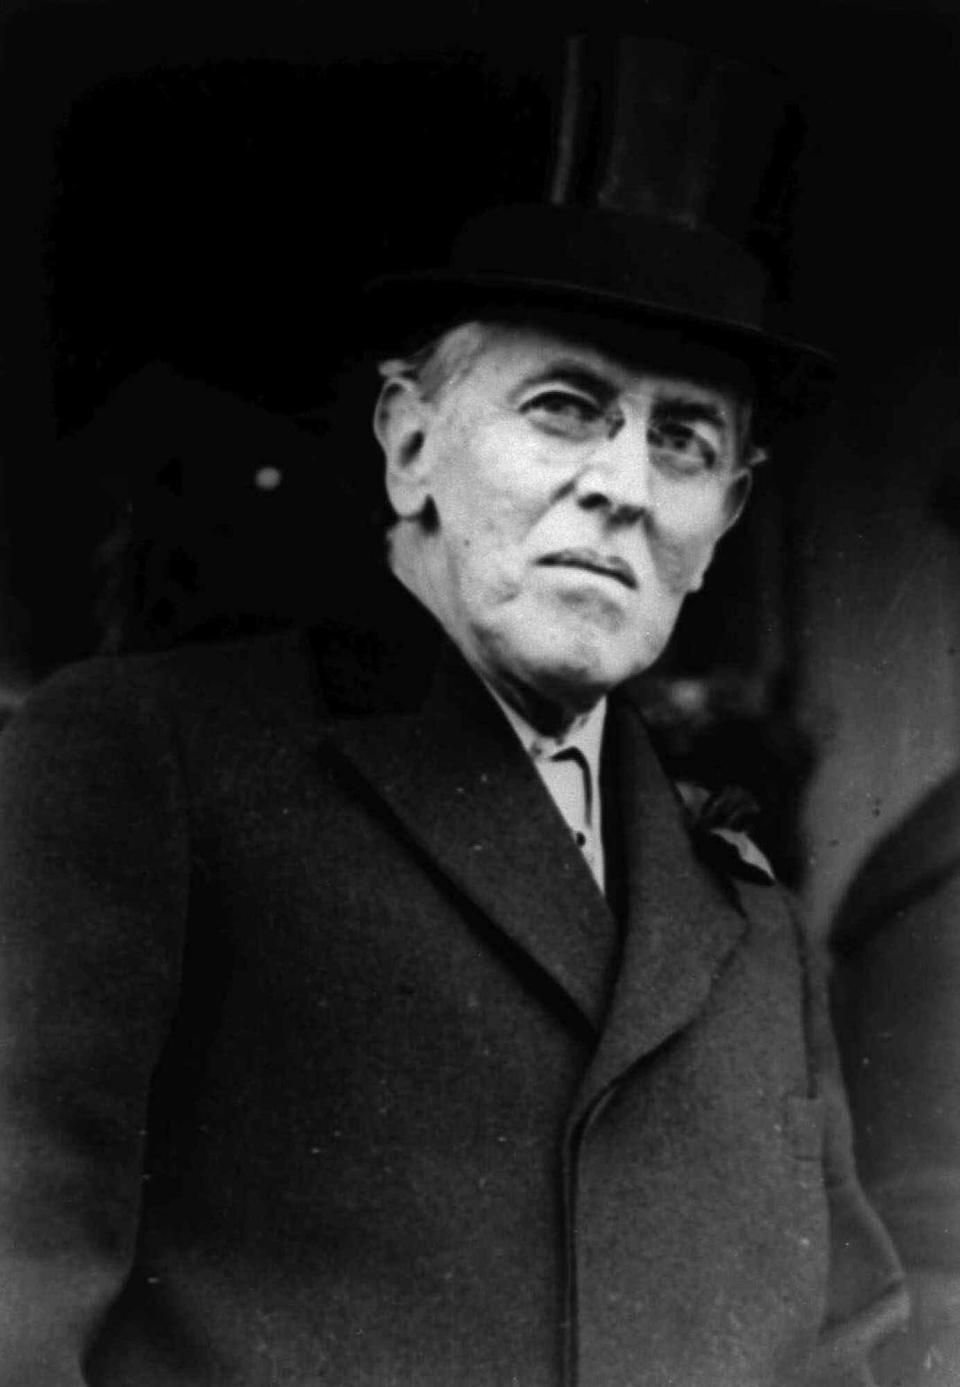 Woodrow Wilson in 1924.  As the 28th president, Wilson, a former New Jersey governor and president of Princeton University, led the country during World War I and was a leading advocate of the League of Nations. (AP Photo)